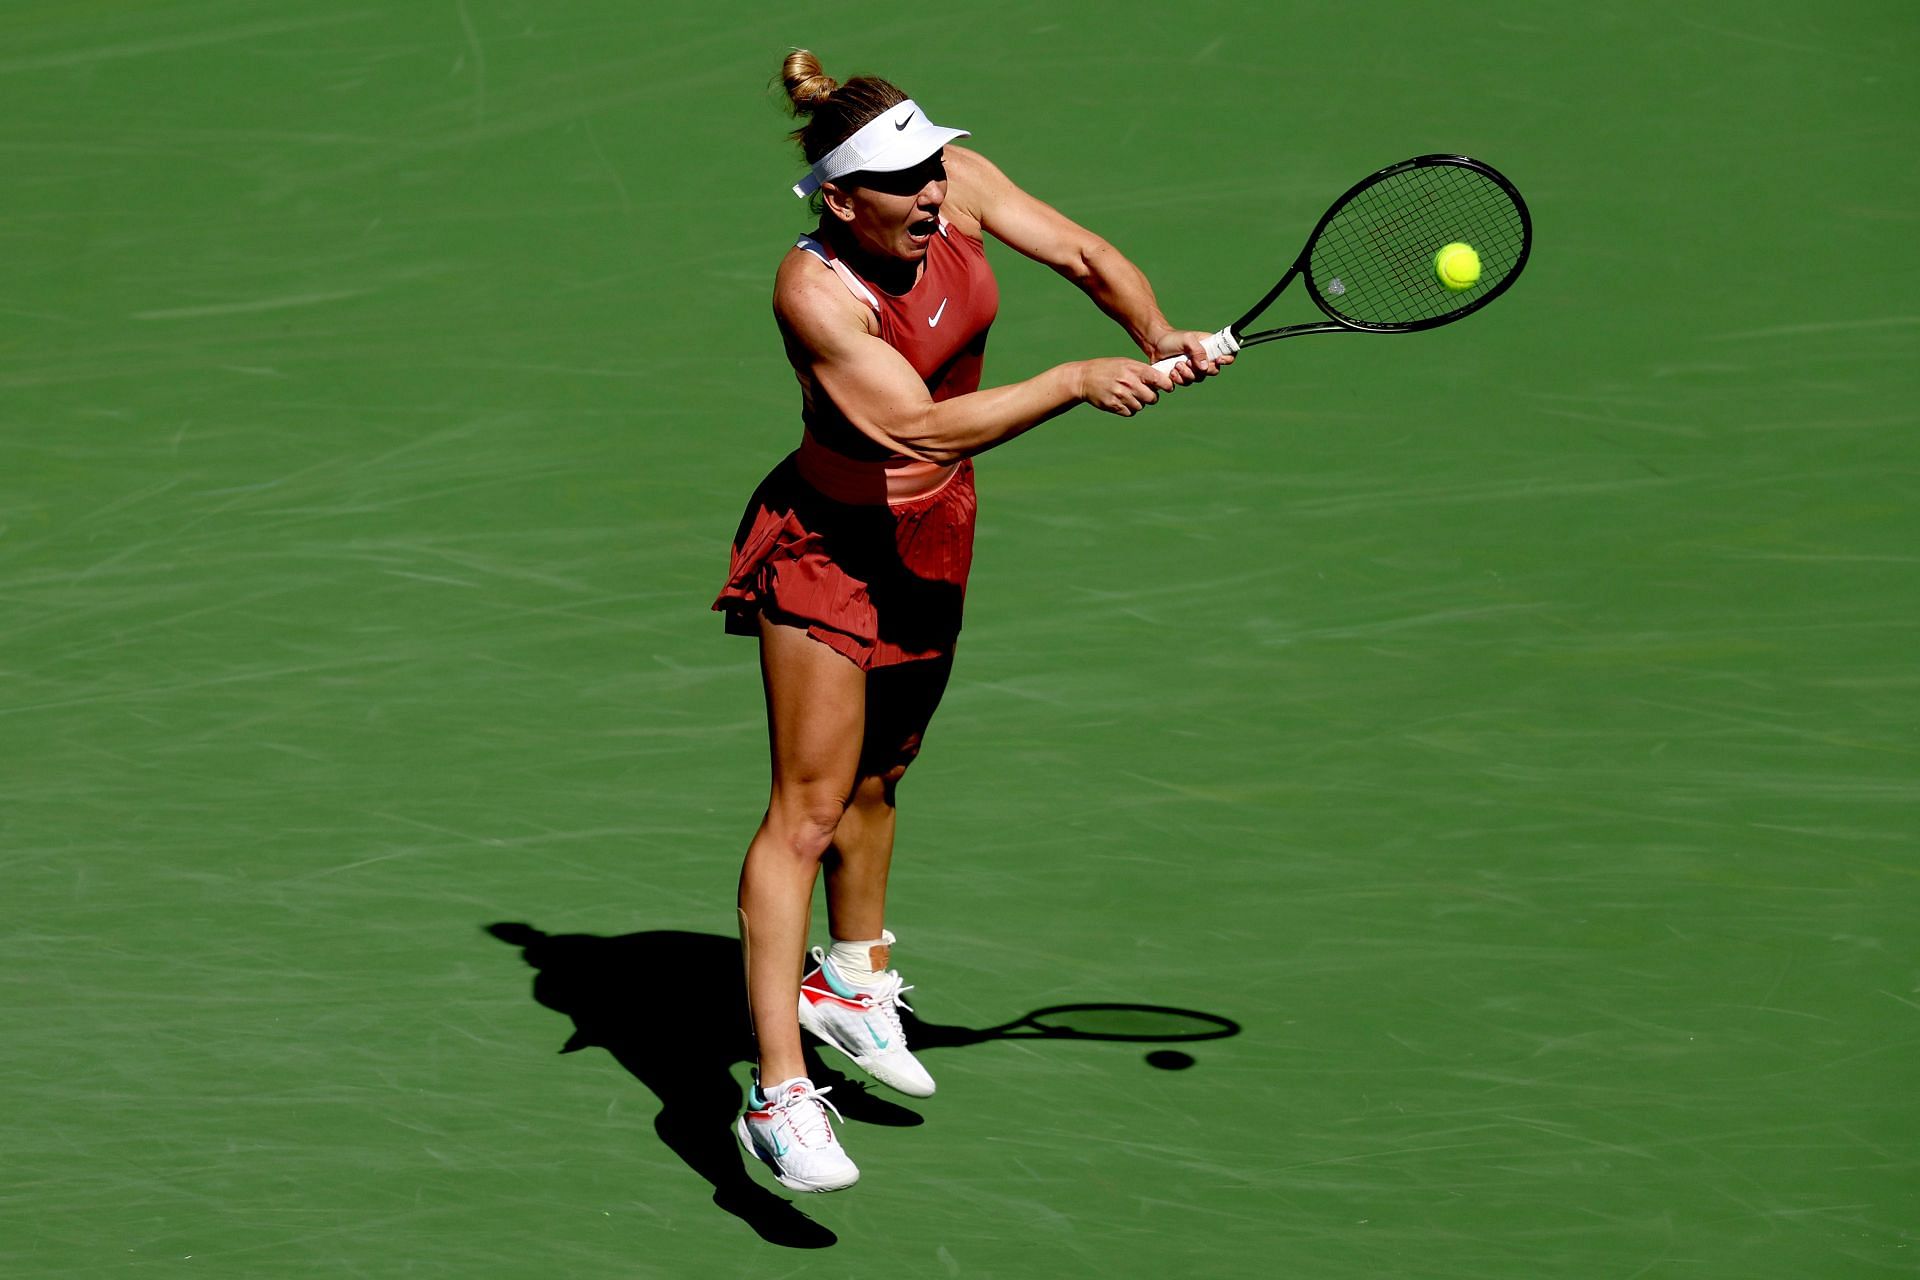 Simona Halep will look to continue her good run of form at Indian Wells